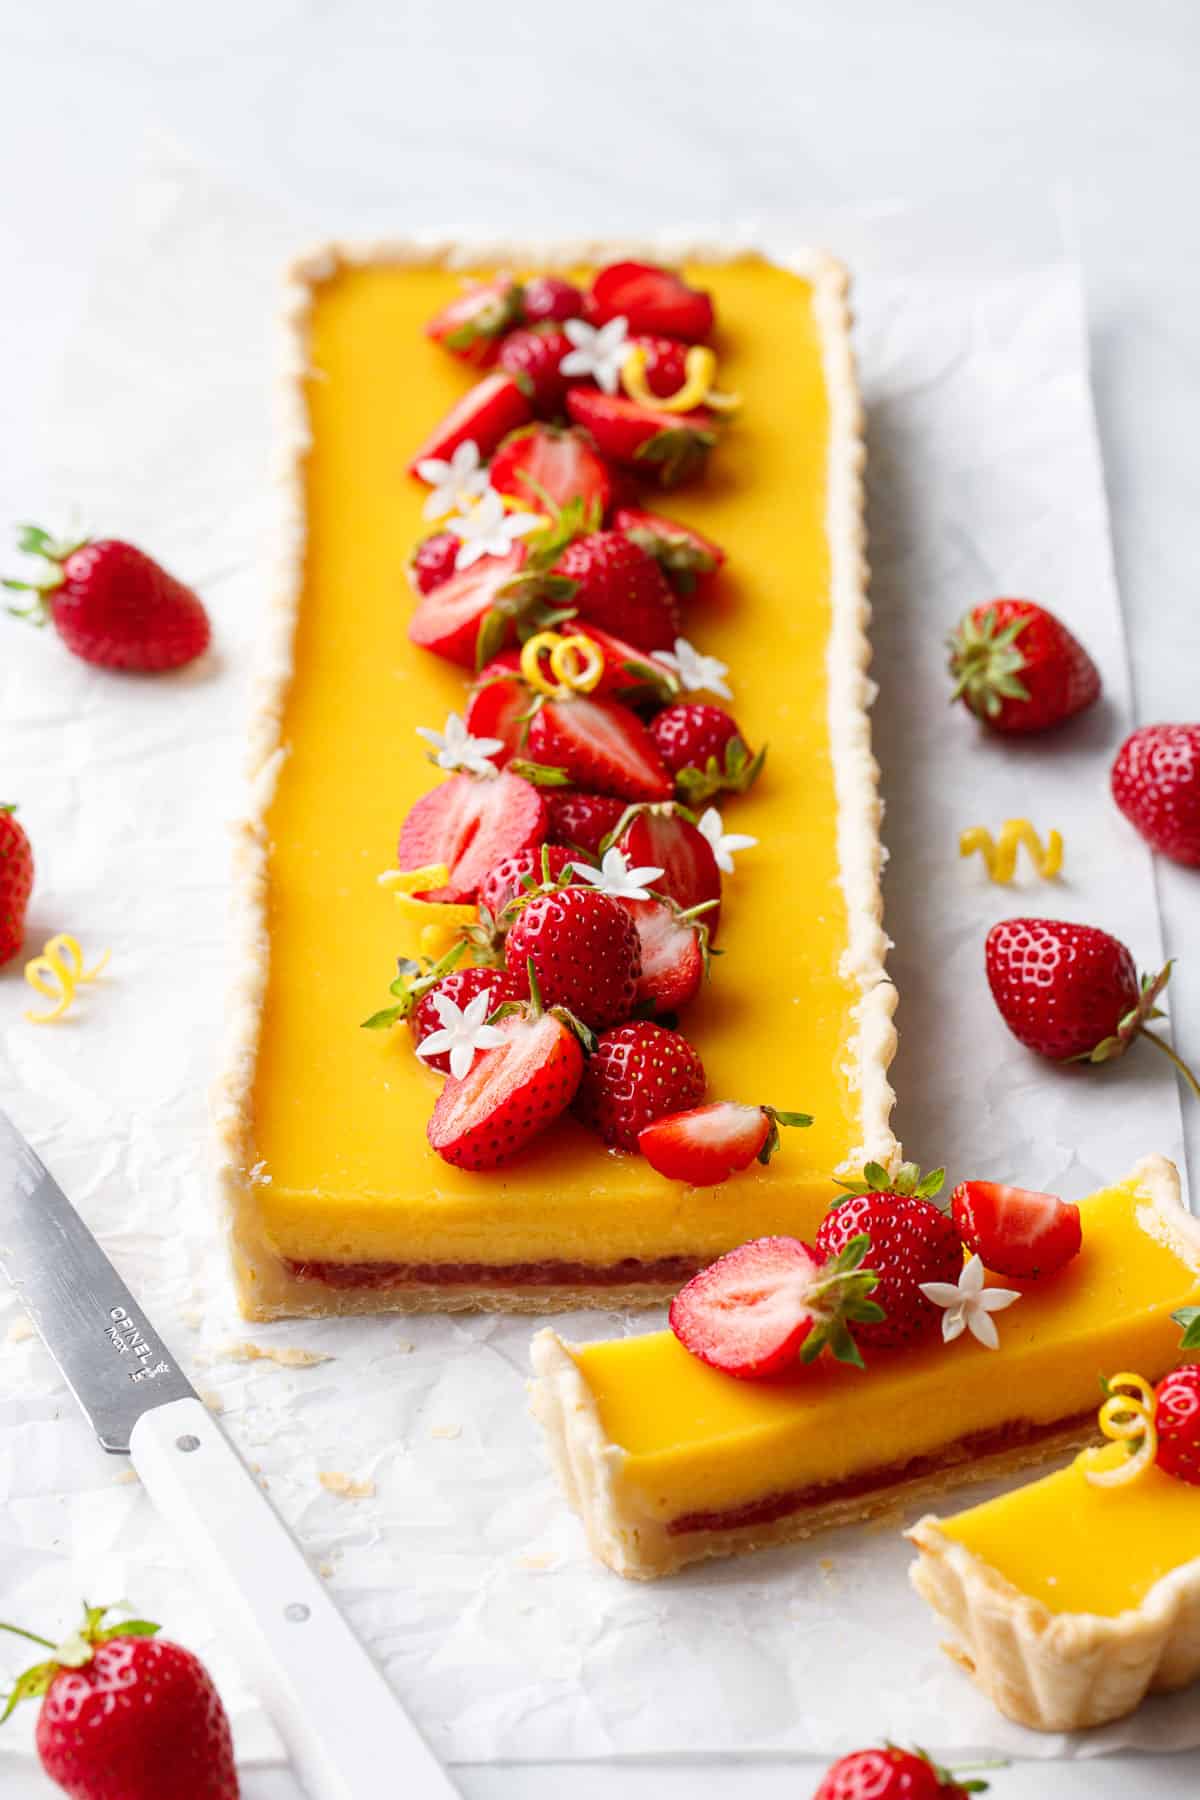 Strawberry Meyer Lemon Tart cut in slices to show the layer of strawberry jam at the bottom.